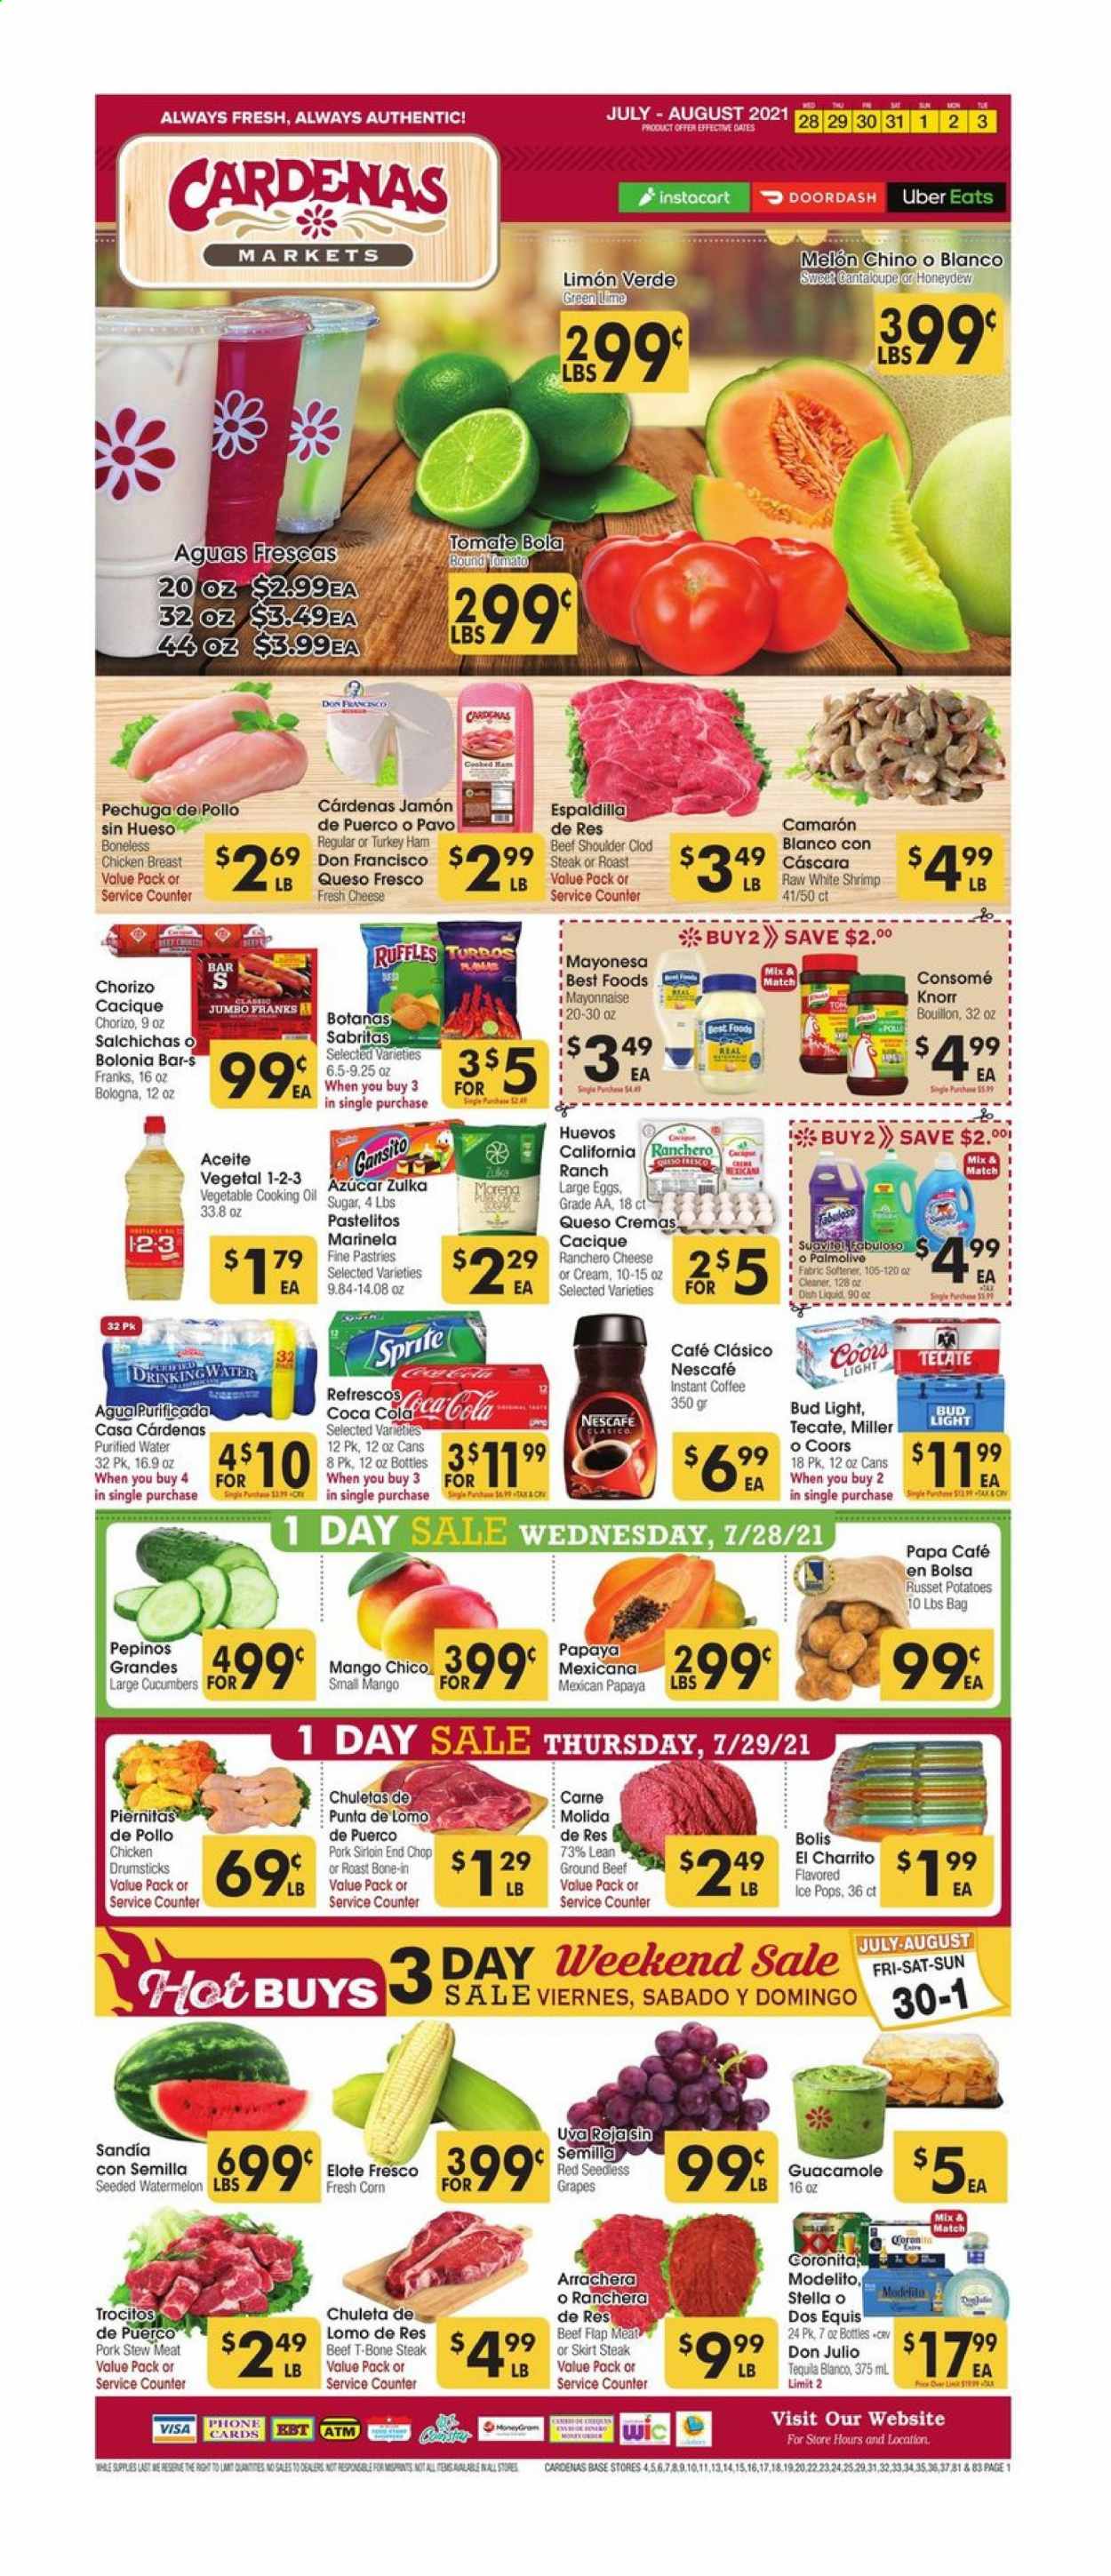 thumbnail - Cardenas Flyer - 07/28/2021 - 08/03/2021 - Sales products - stew meat, seedless grapes, cantaloupe, corn, cucumber, russet potatoes, potatoes, grapes, mango, watermelon, honeydew, papaya, shrimps, Knorr, ham, chorizo, guacamole, queso fresco, large eggs, mayonnaise, Ruffles, bouillon, sugar, Coca-Cola, purified water, instant coffee, Nescafé, tequila, beer, Coors, Dos Equis, Bud Light, Miller, chicken breasts, beef meat, ground beef, t-bone steak, steak, pork loin, cleaner, fabric softener, Palmolive, melons. Page 1.